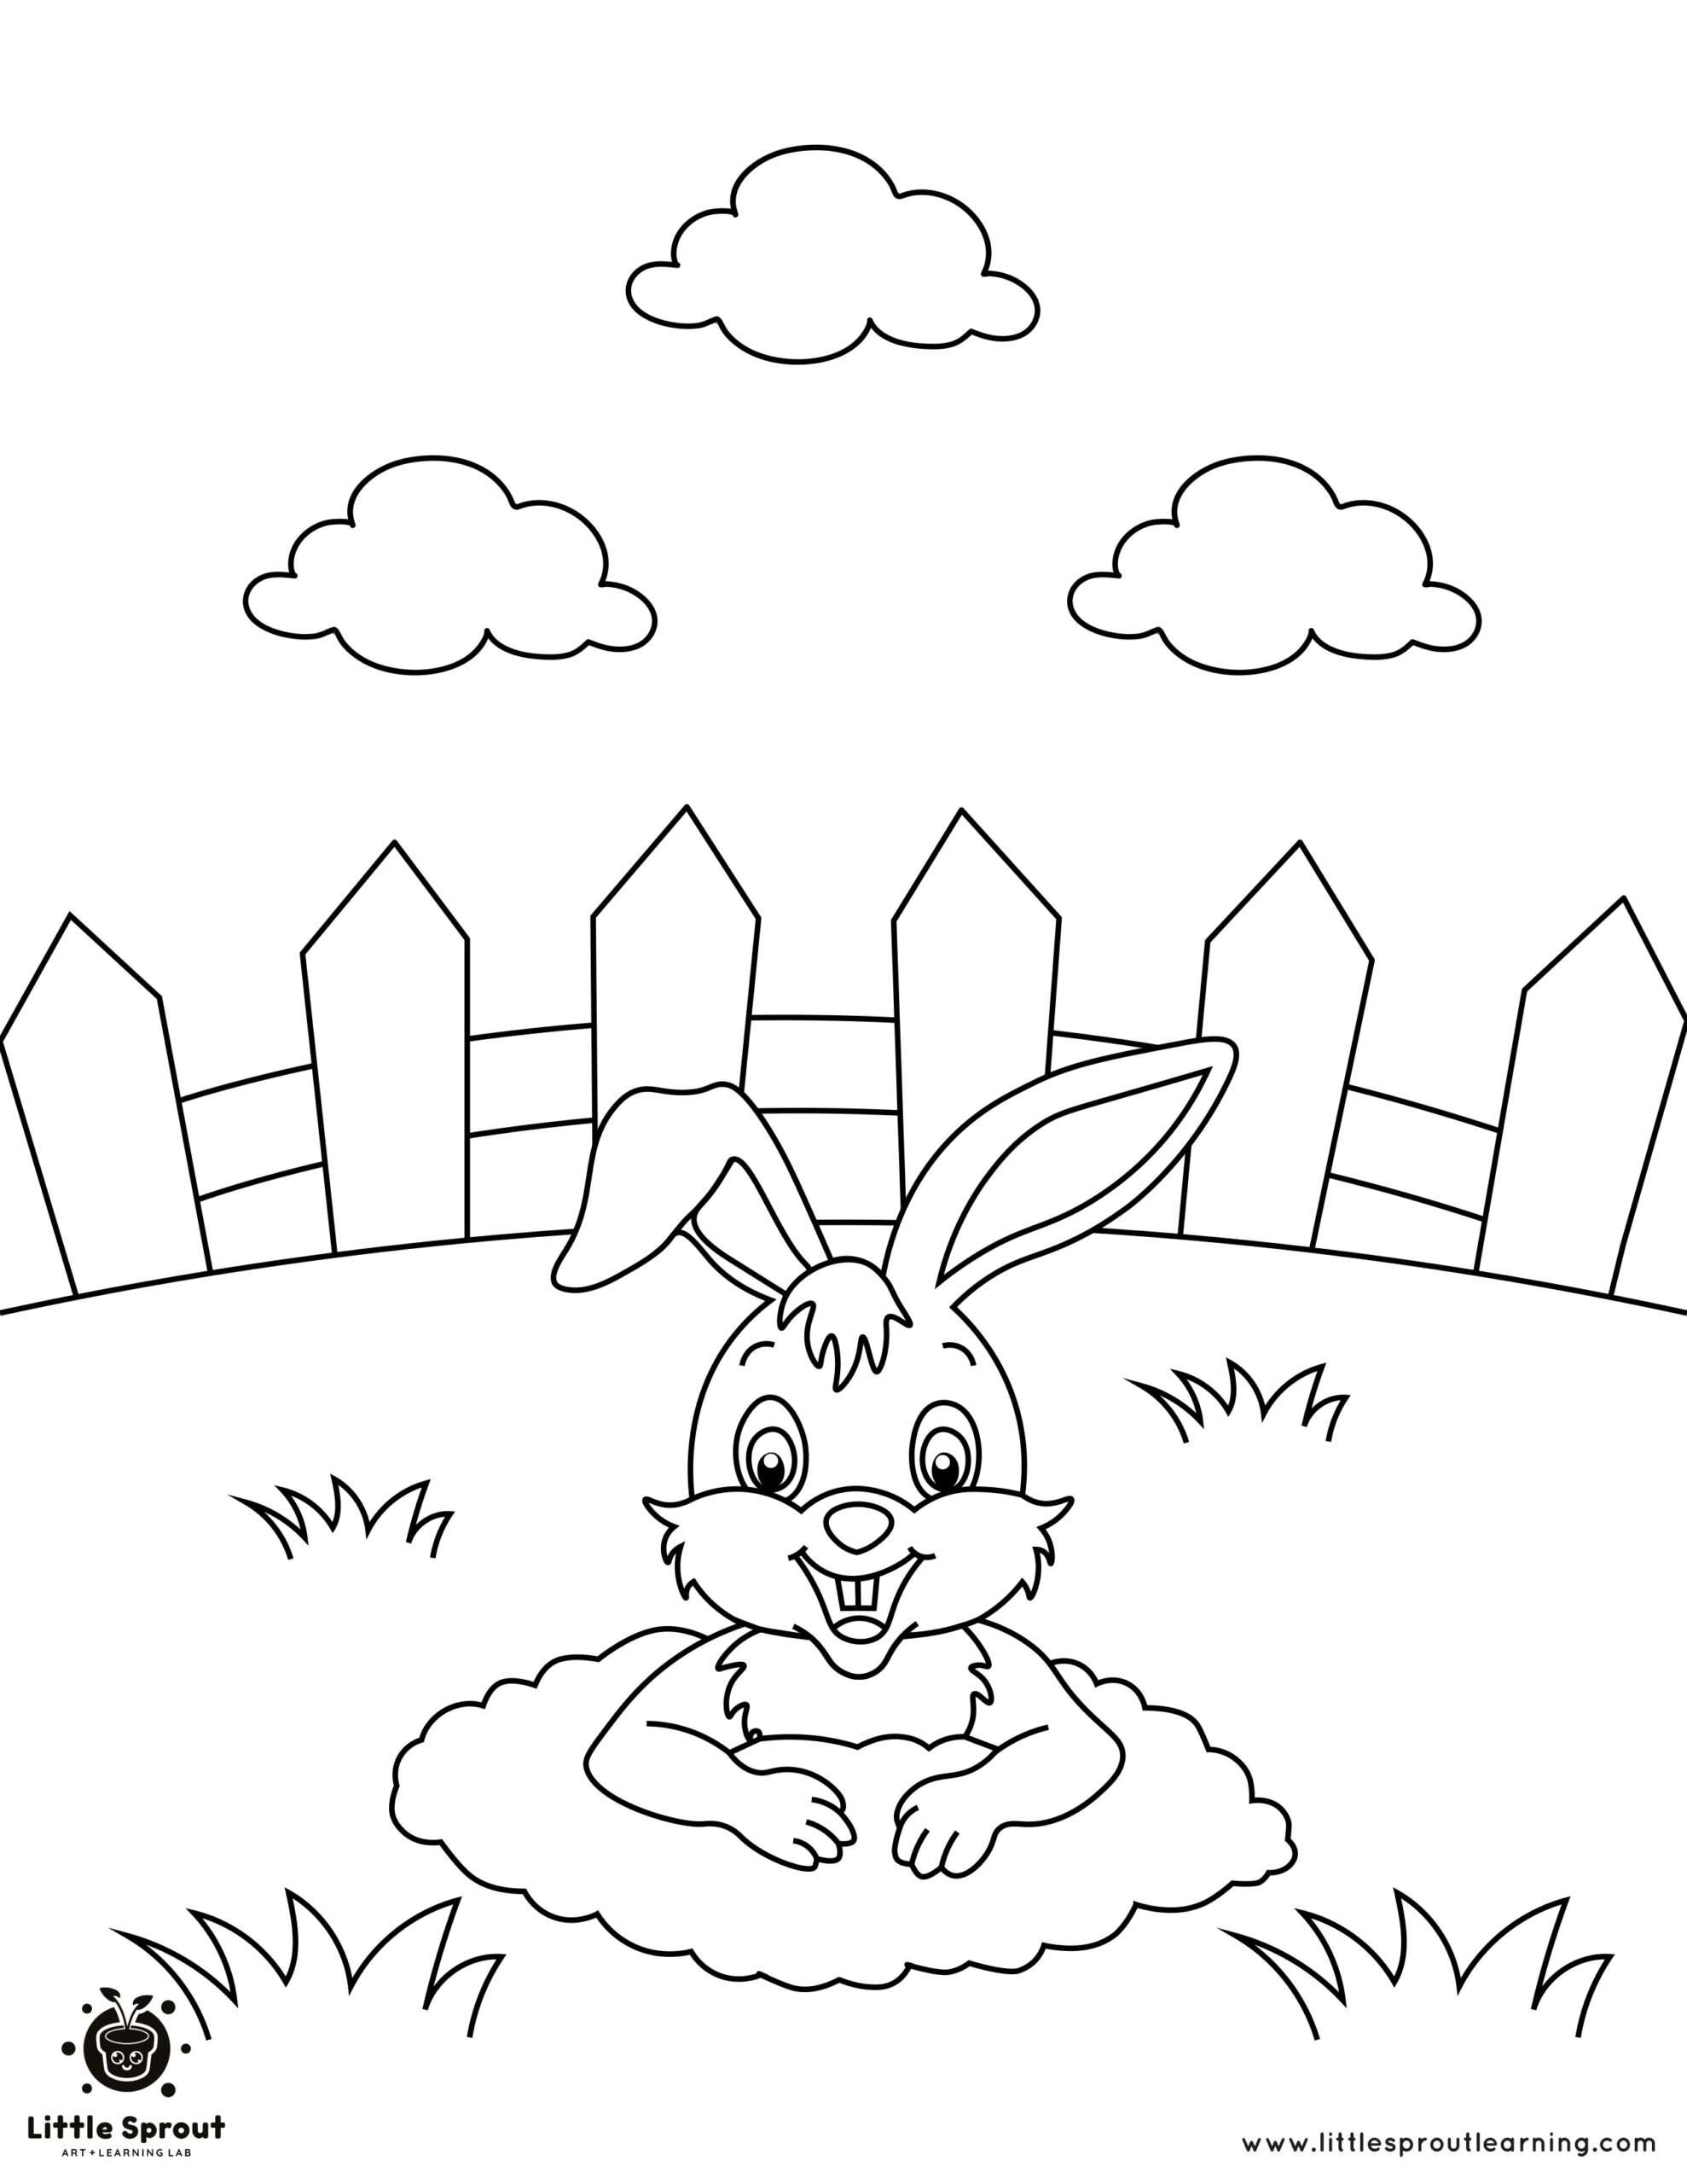 Bunny Coloring Page |